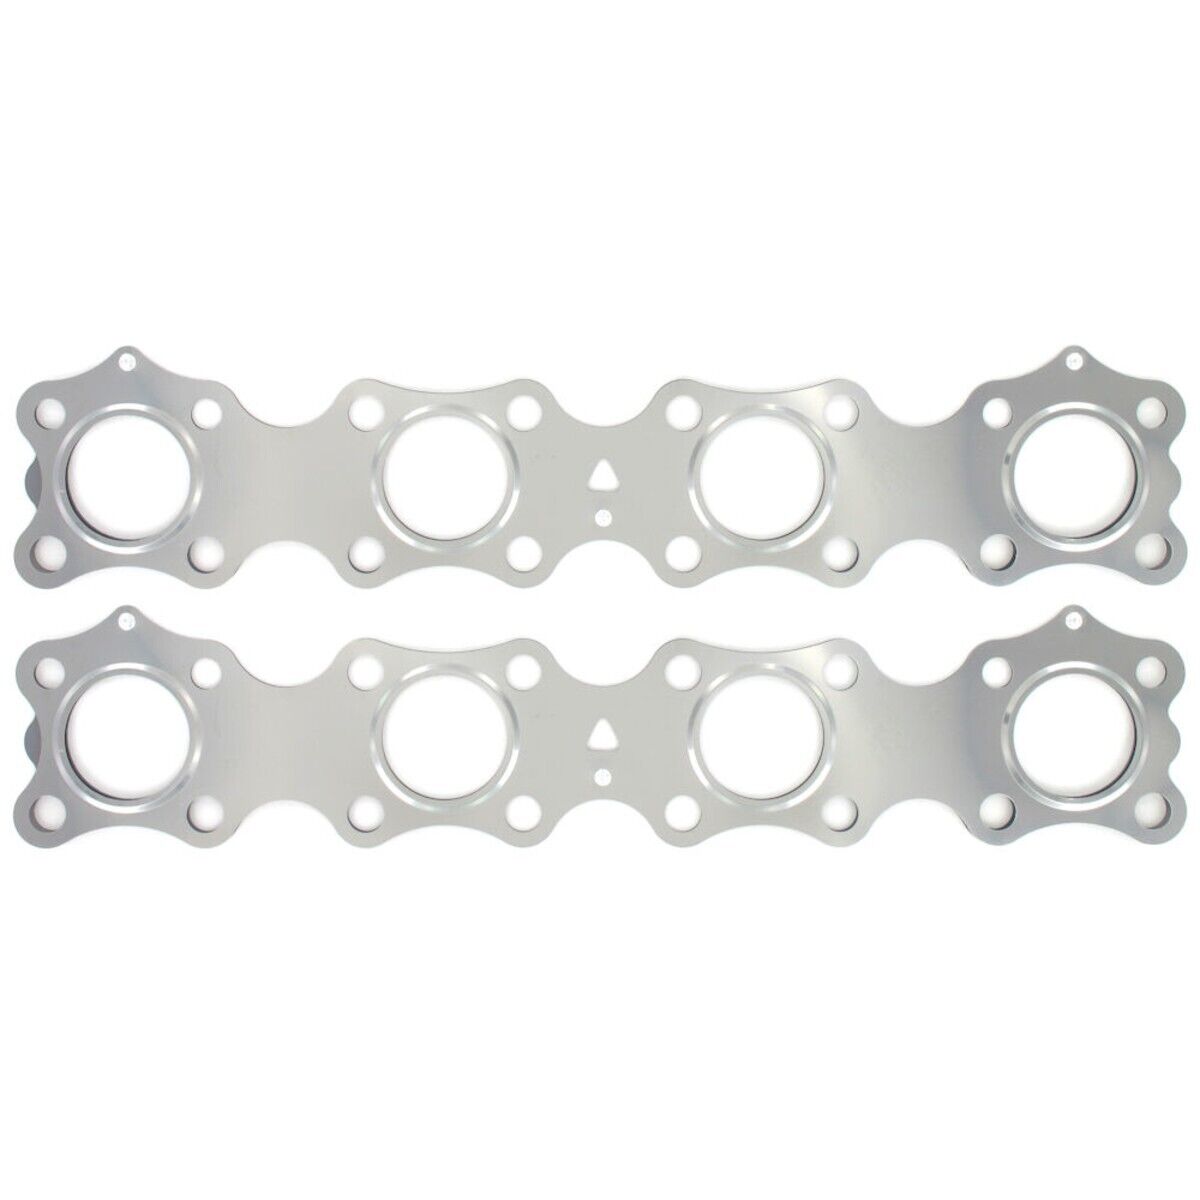 AMS5602 APEX Exhaust Manifold Gaskets Set of 2 for INFINITI Q45 M45 FX45 Pair